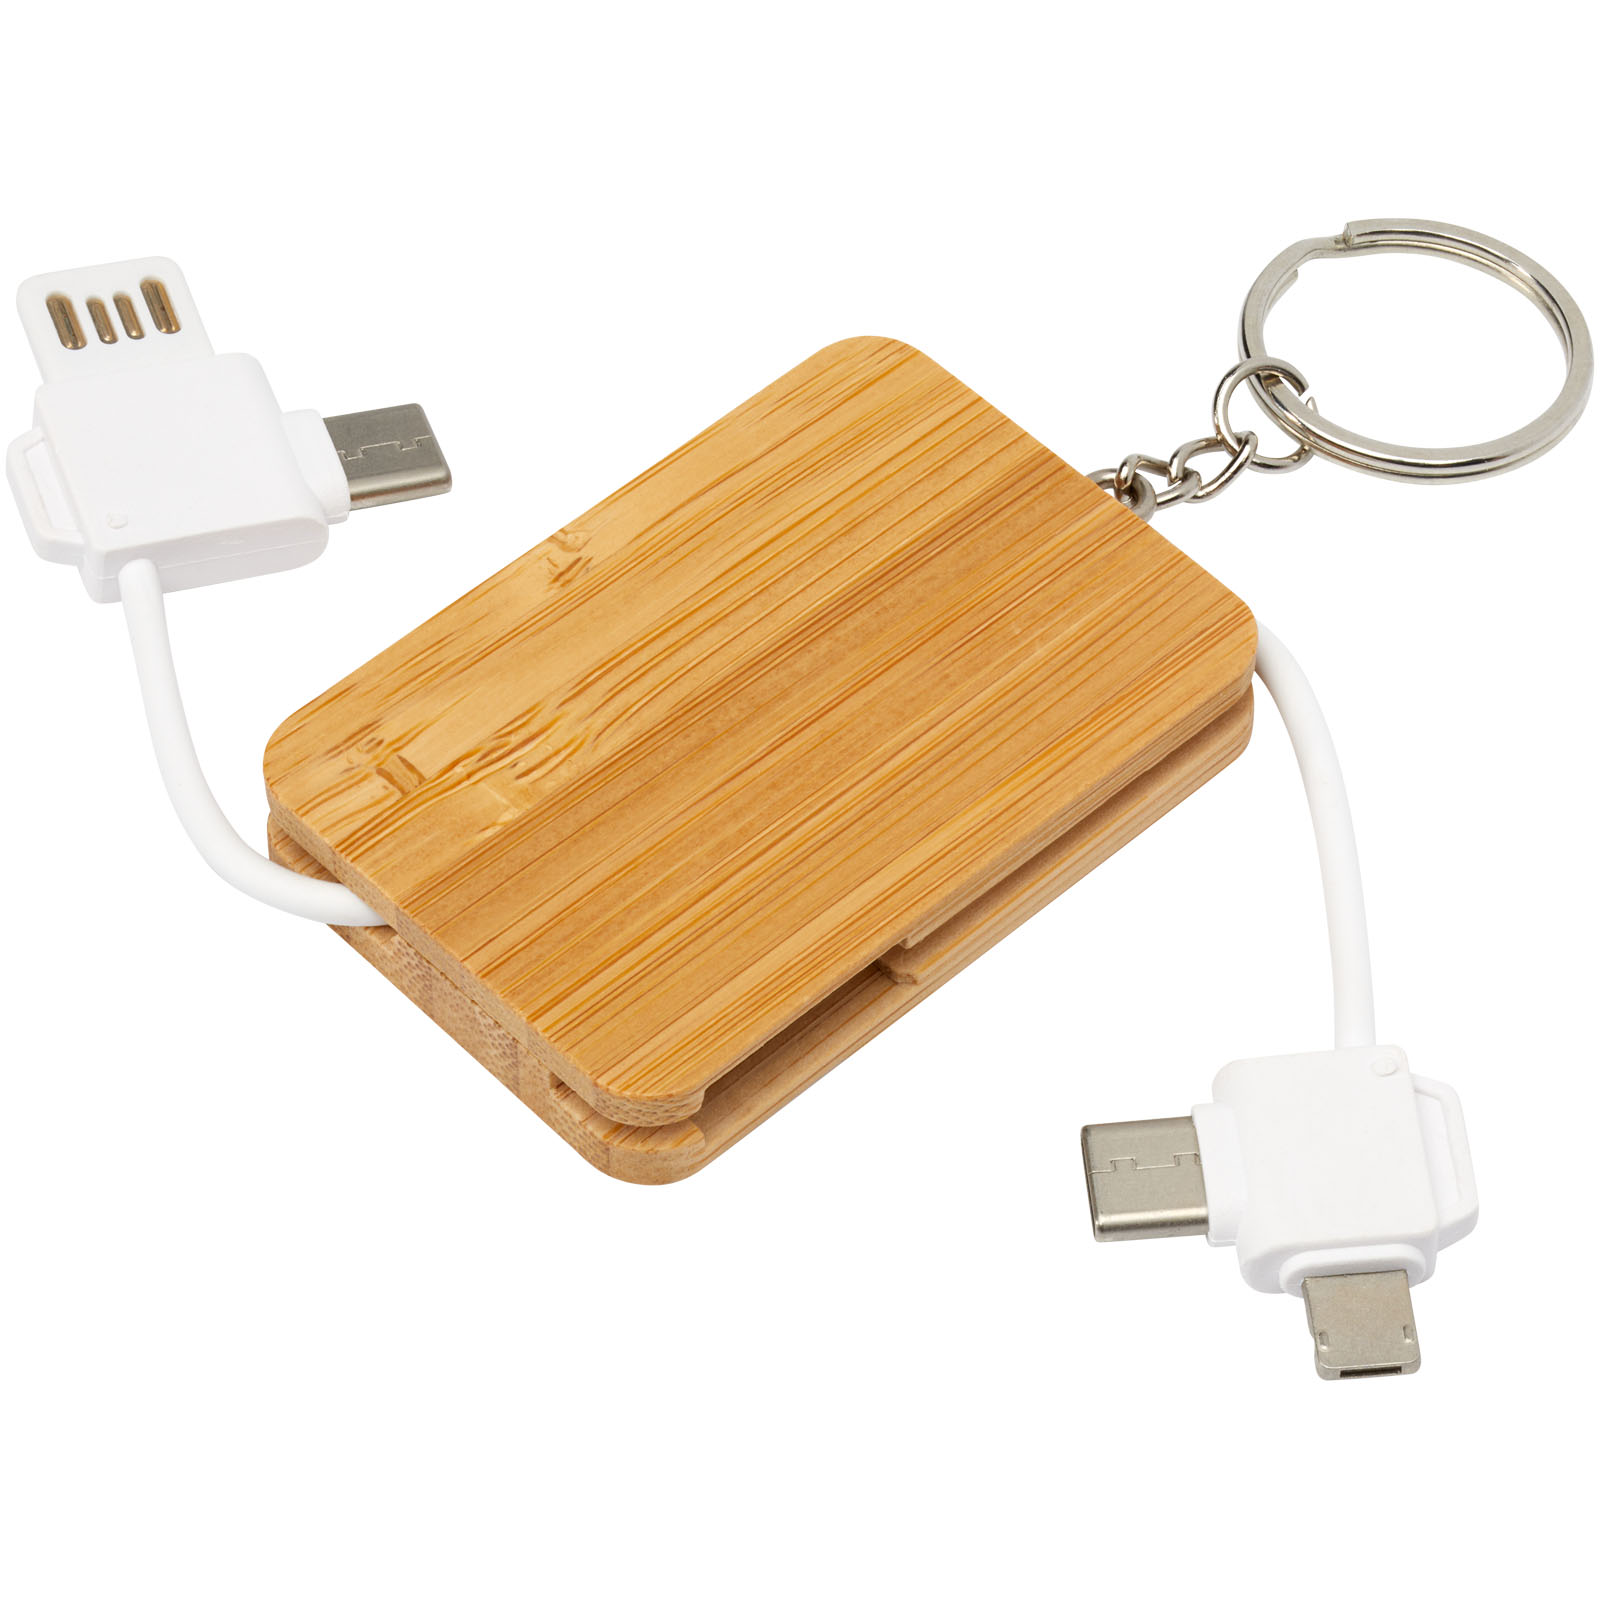 Technology - Reel 6-in-1 retractable bamboo key ring charging cable